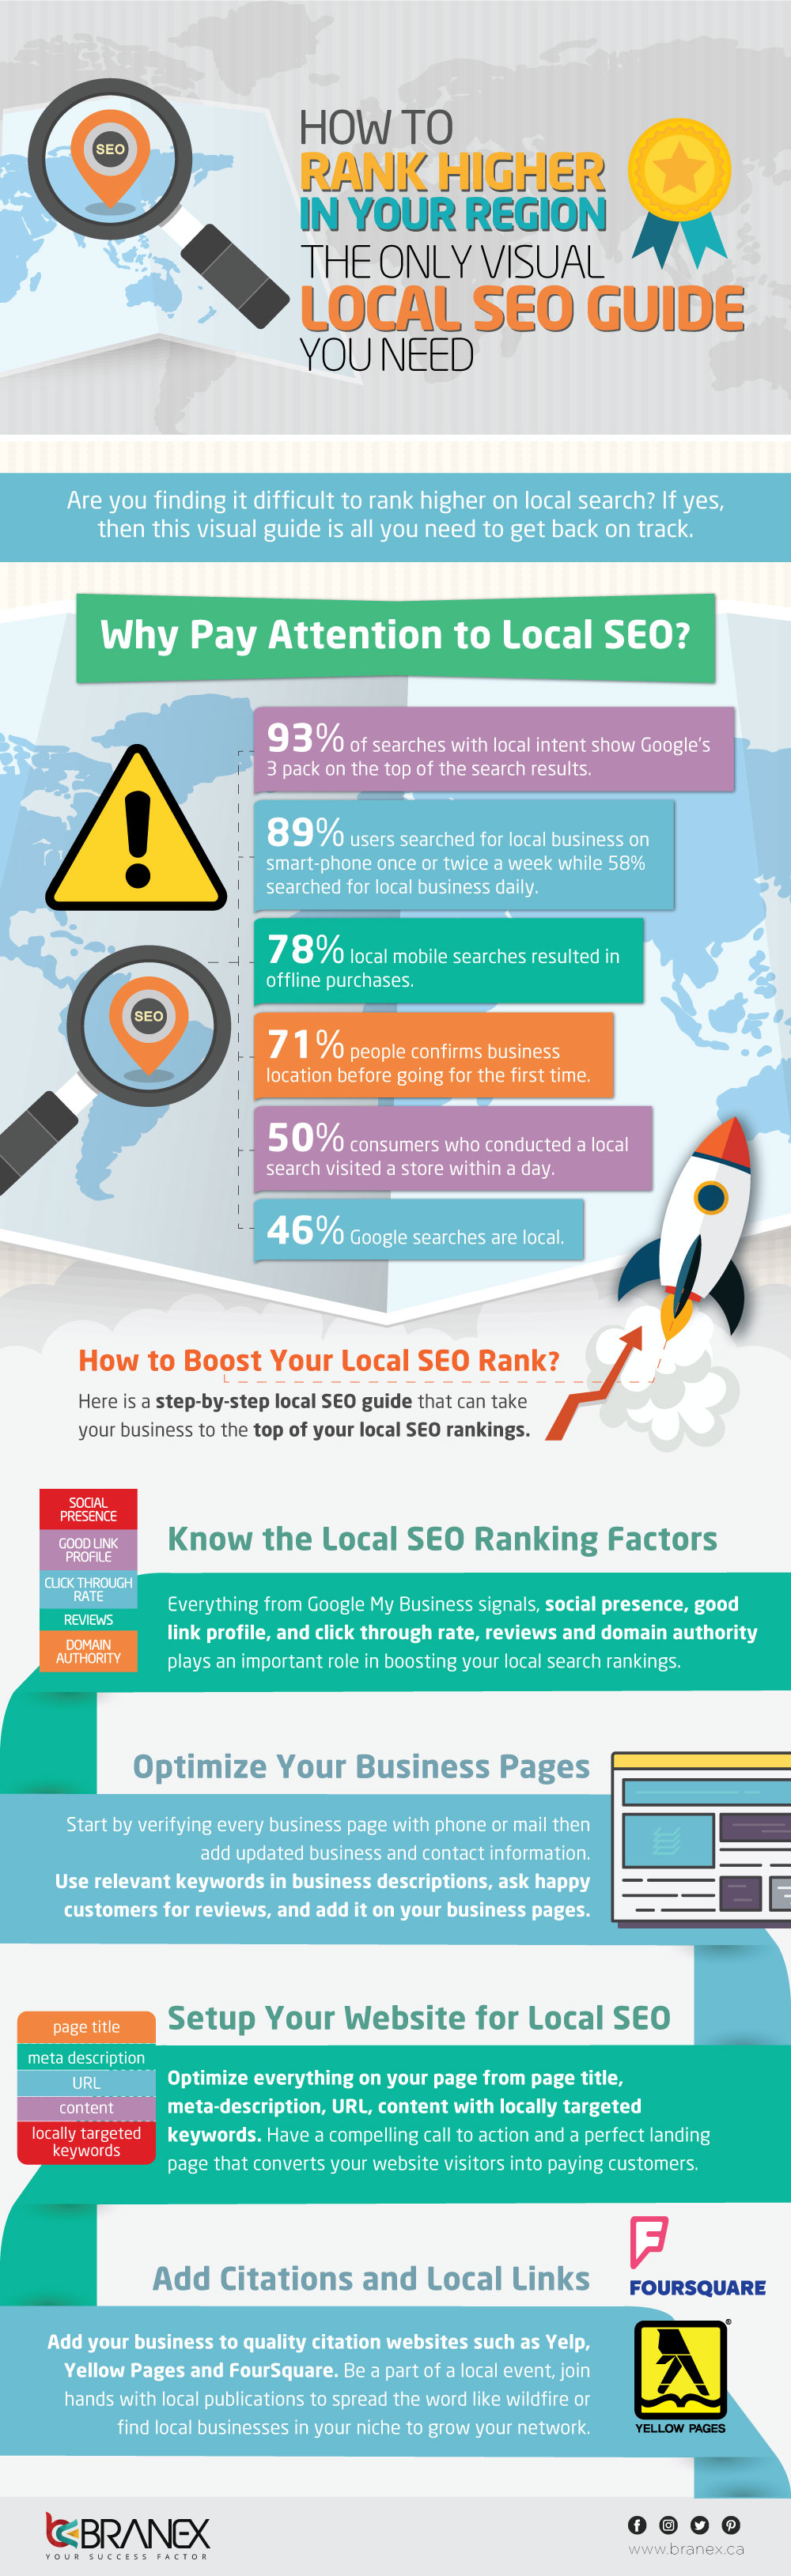 How To Rank Higher In Your Region? The Only Visual Local SEO Guide You Need